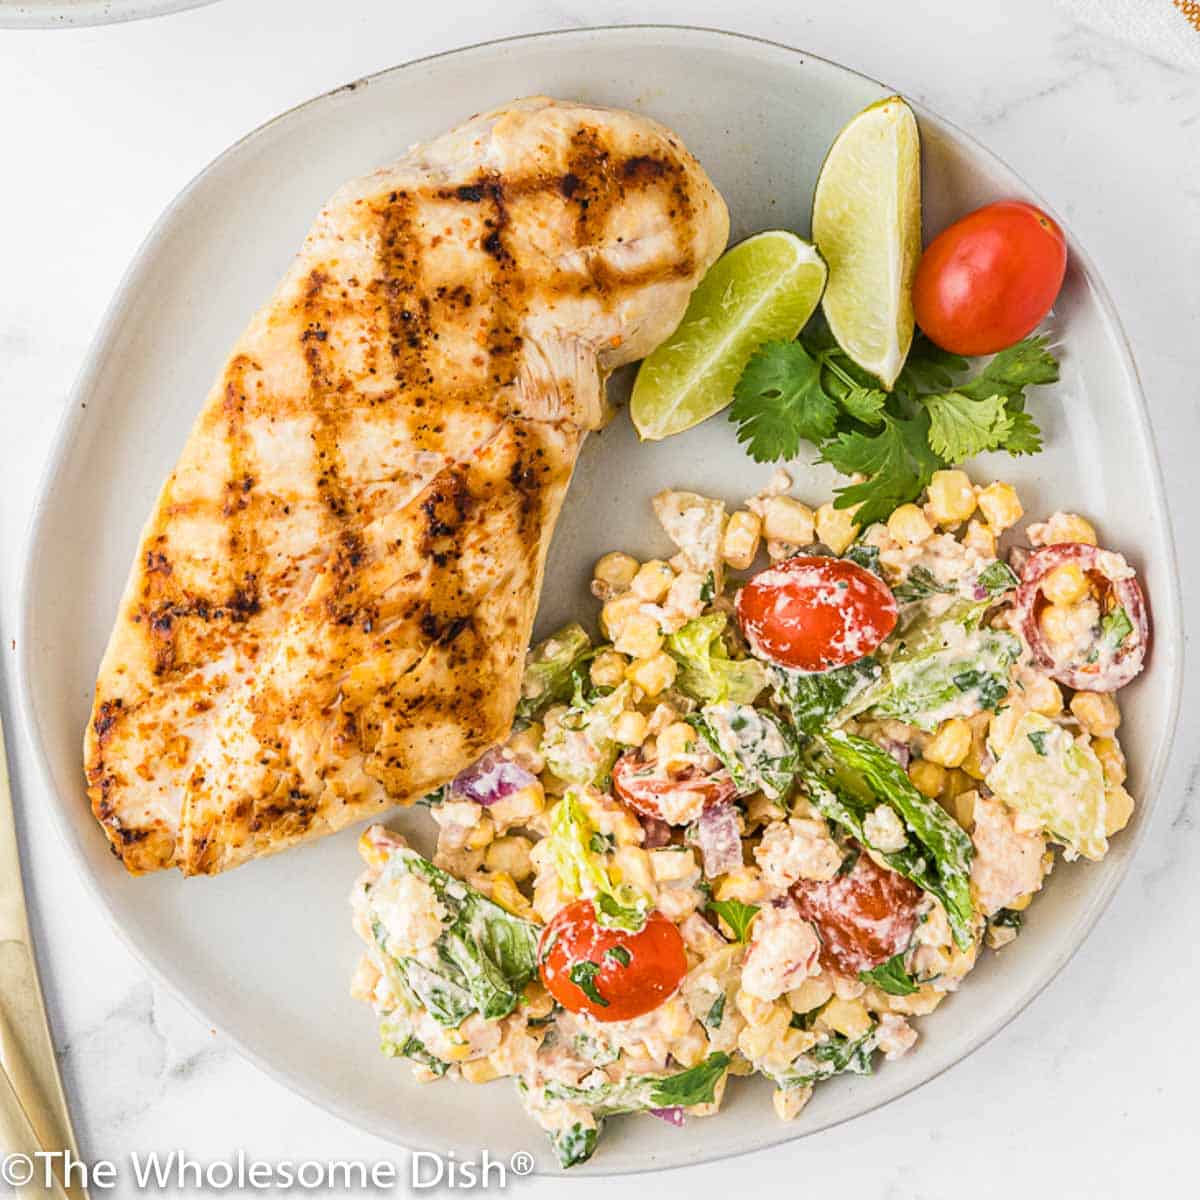 Plate with grilled chicken and Mexican street corn chopped salad.